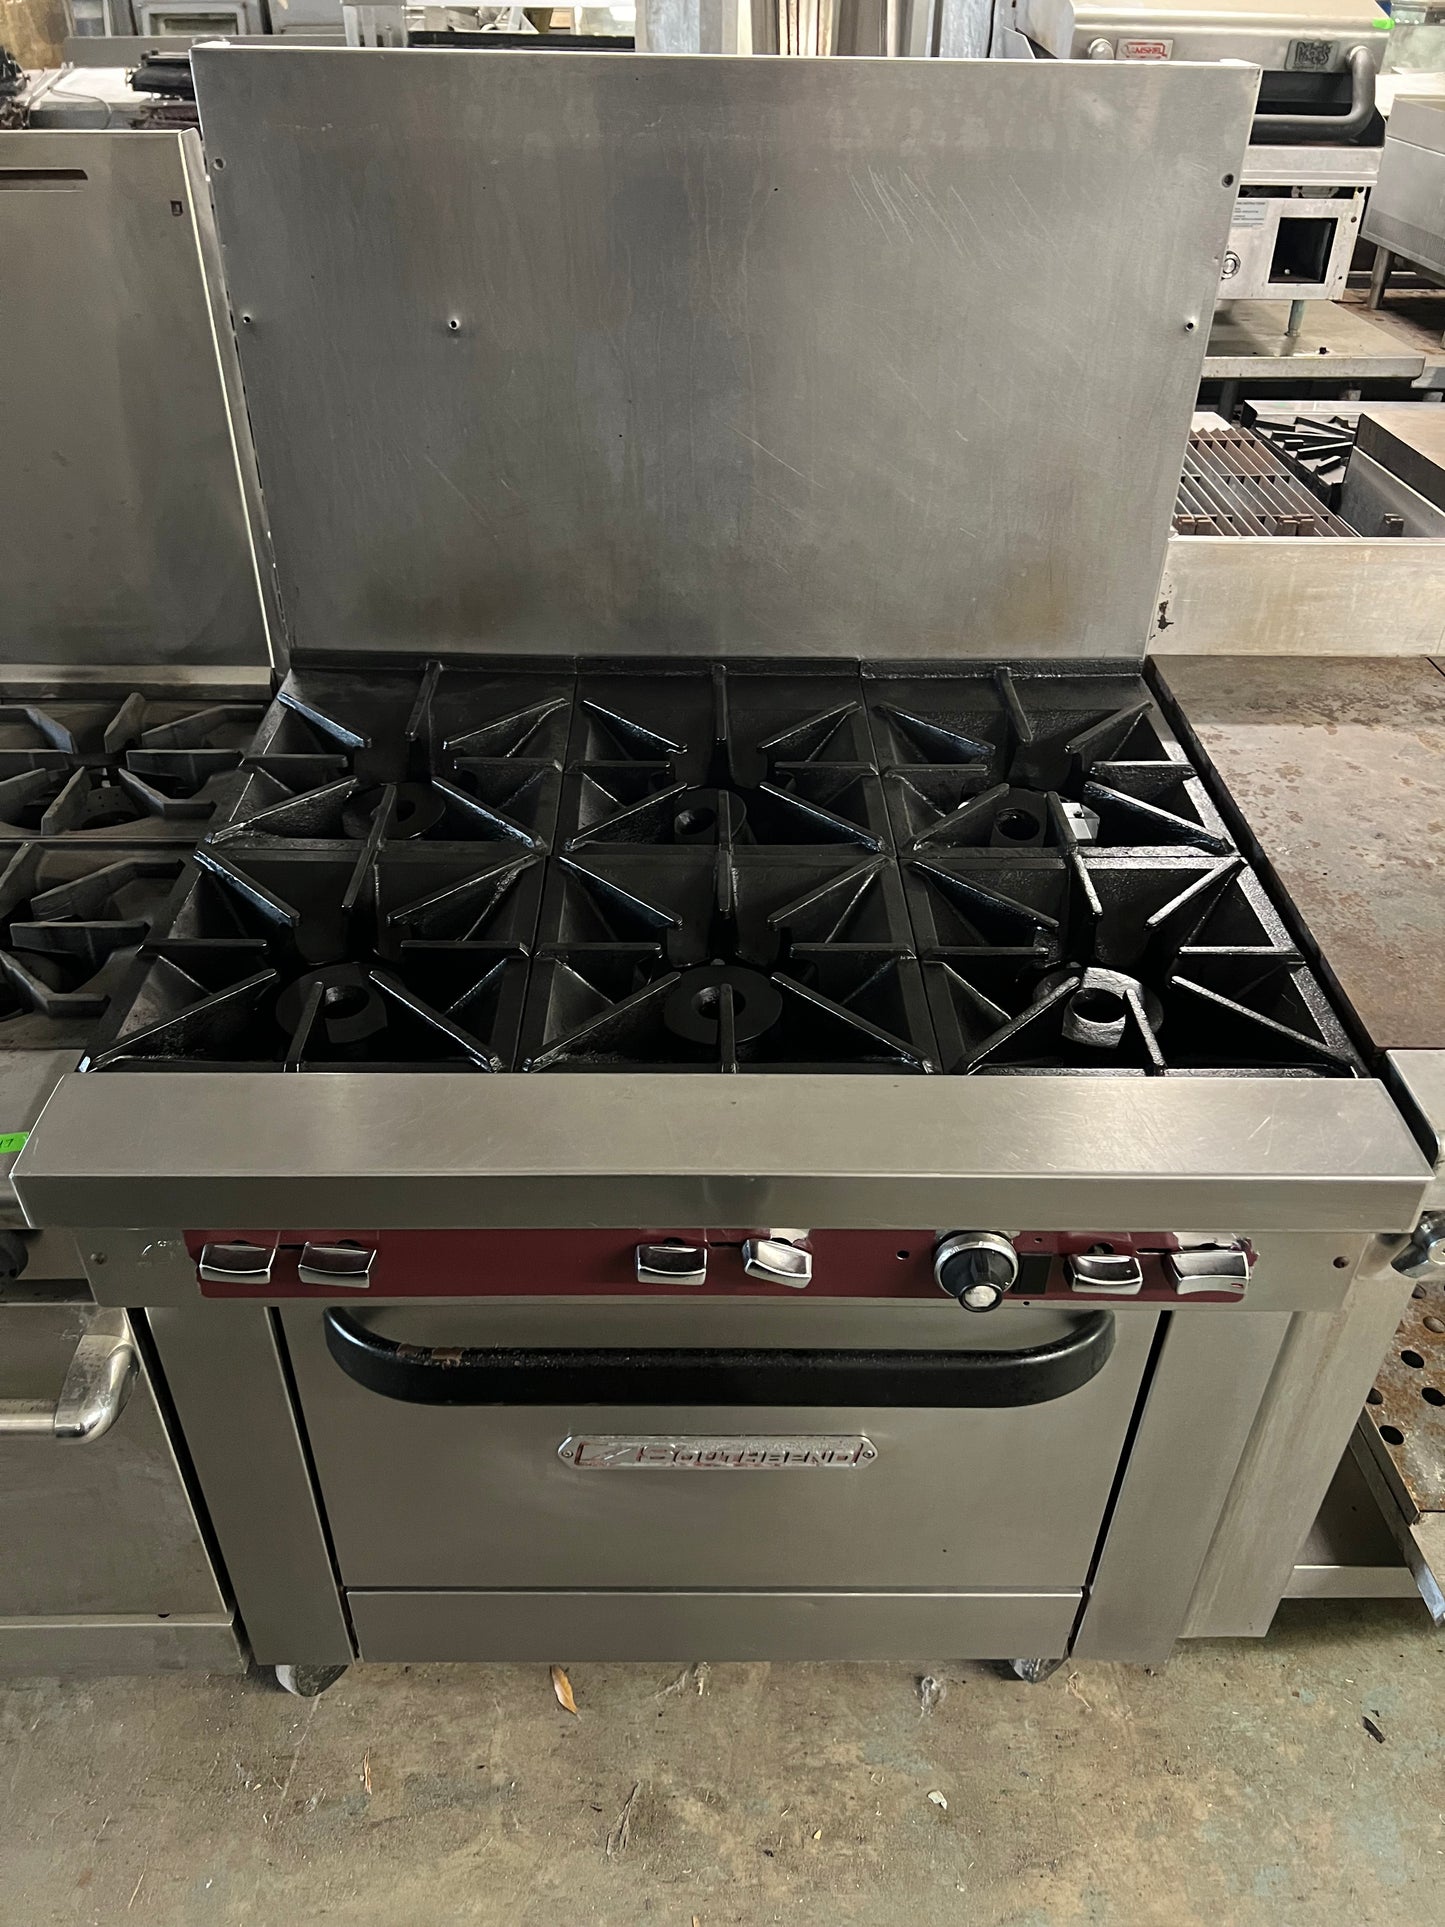 Southbend 6 Burner Gas Range with Oven X336D